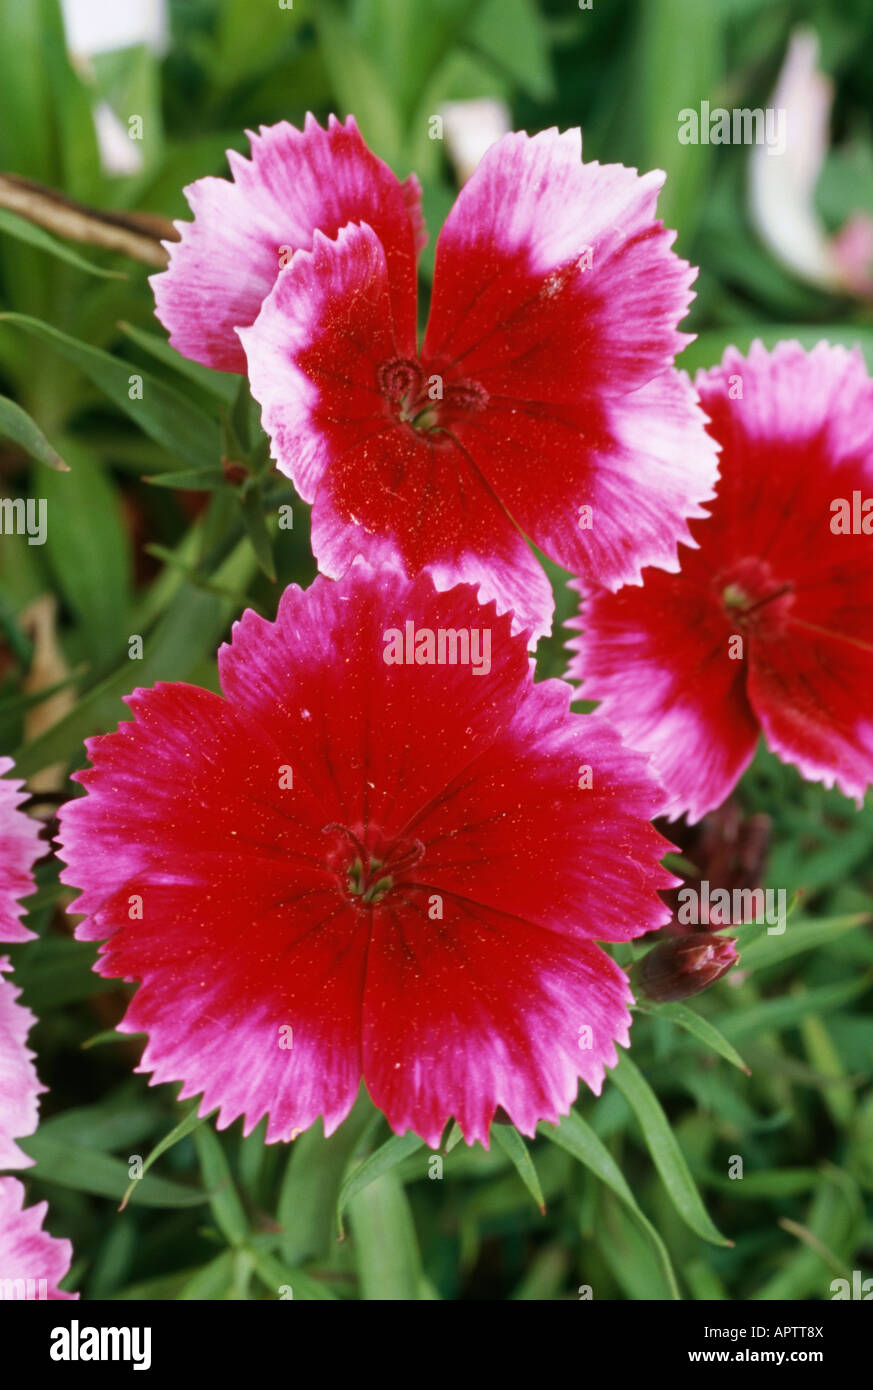 Dianthus barbatus red and pink sweet smelling delicate flower Stock Photo